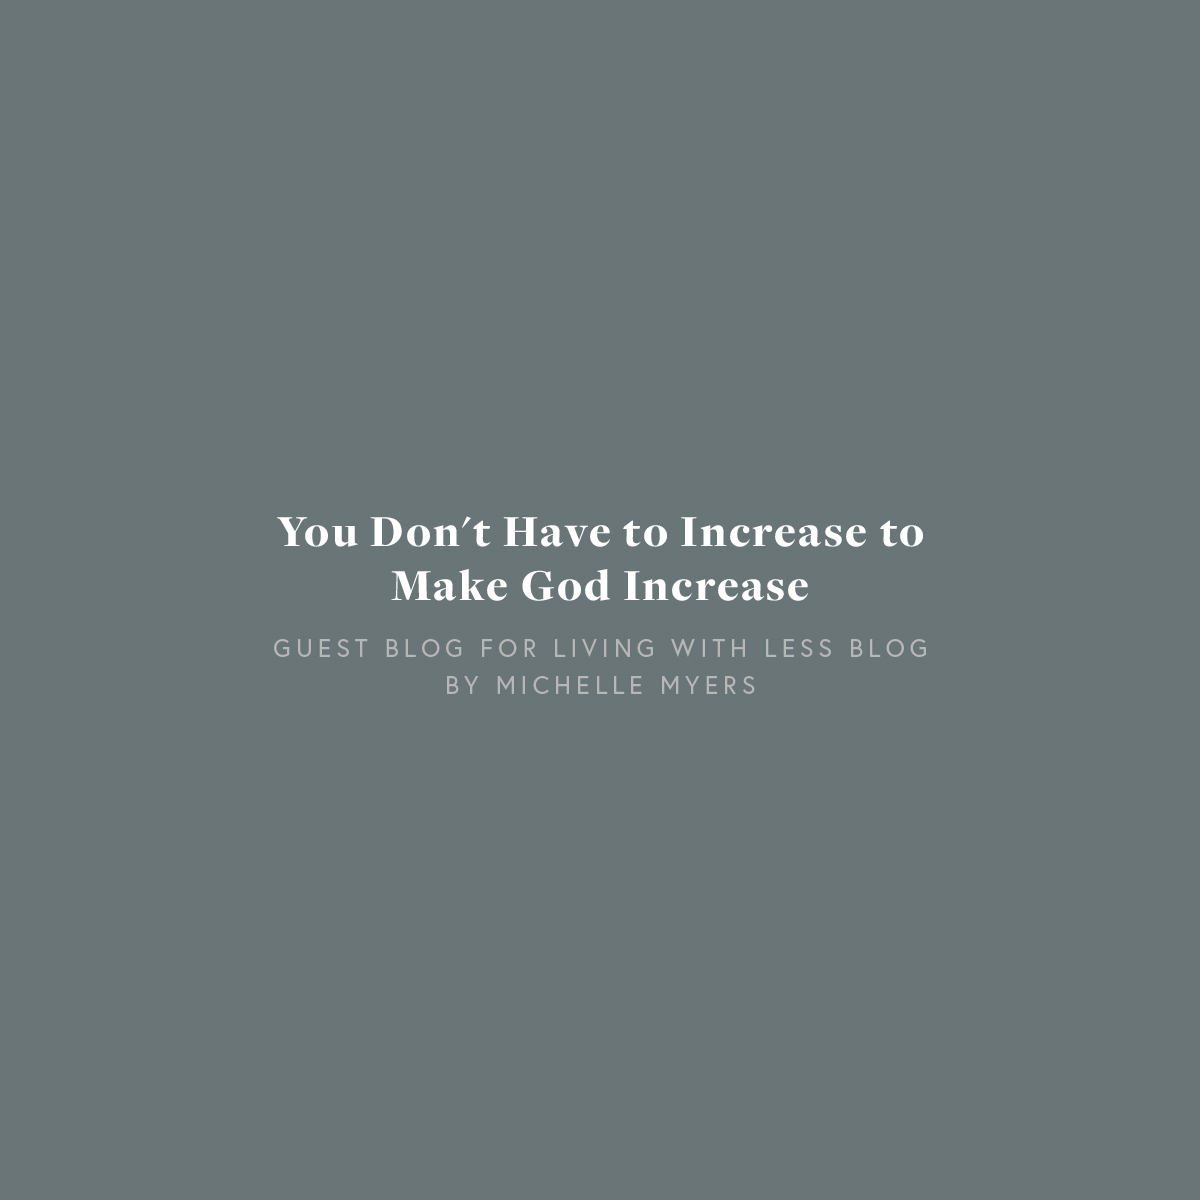 You Don’t Have to Increase to Make God Increase